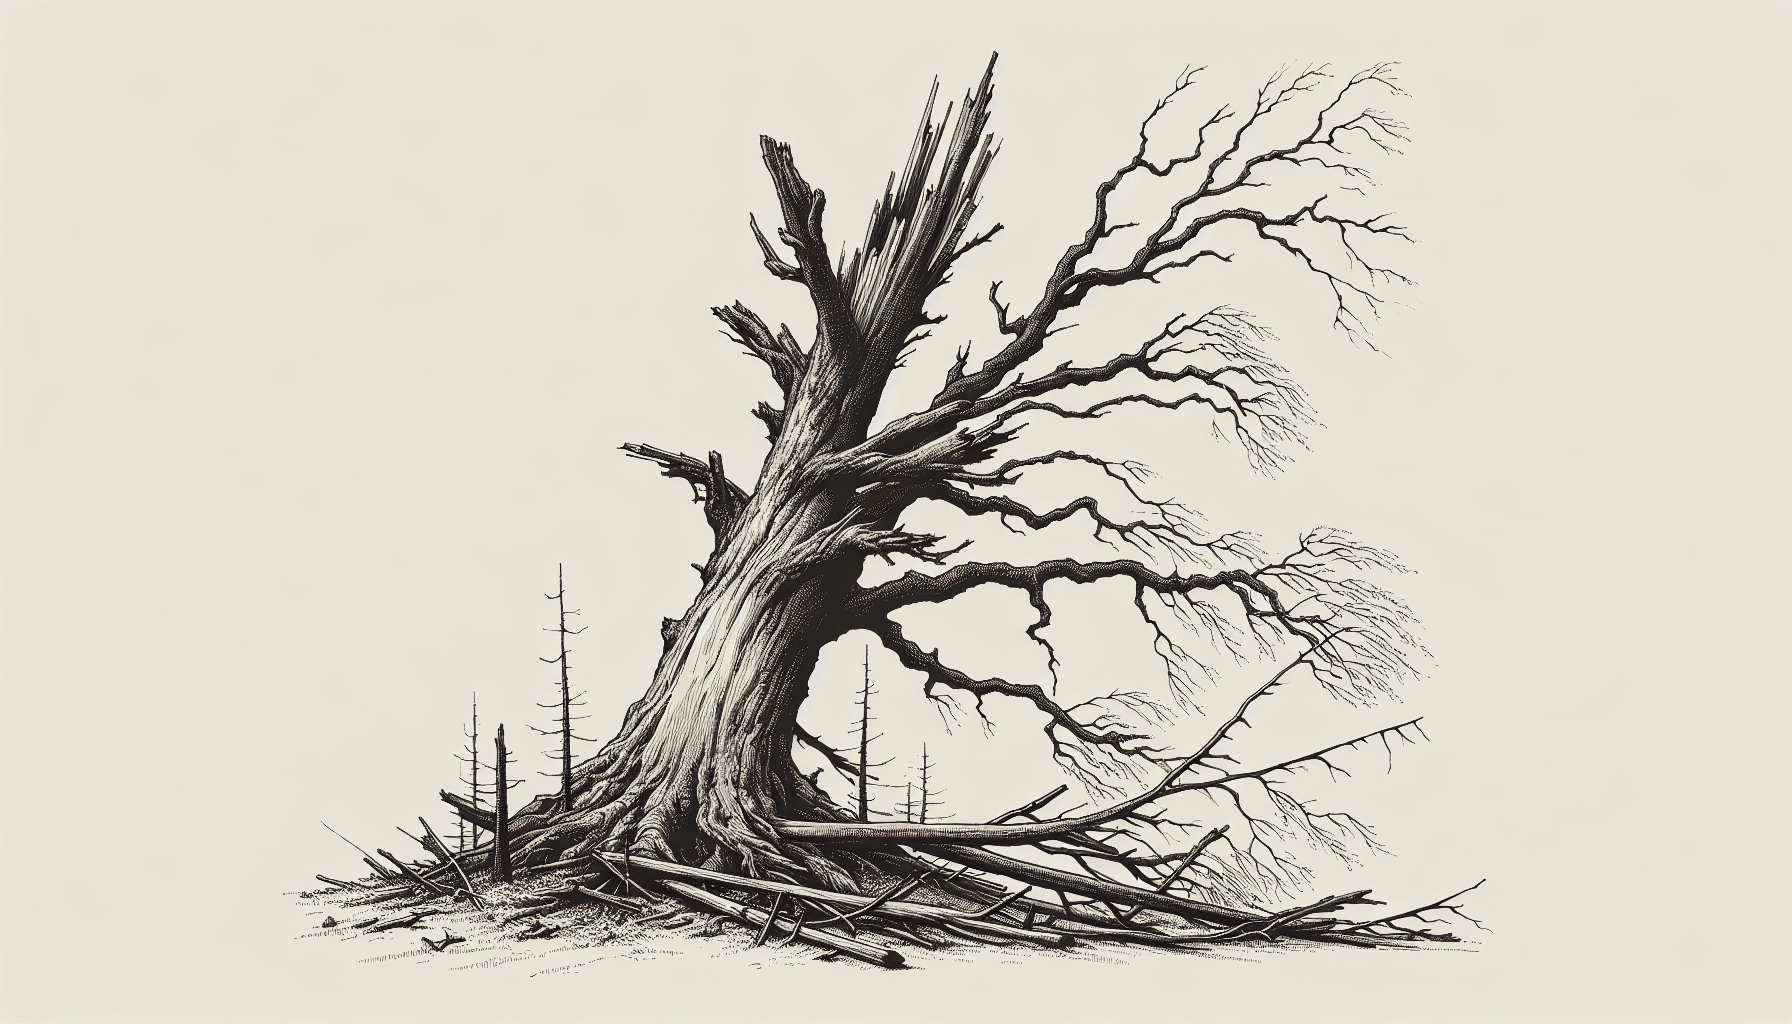 Dead tree with leaning trunk and fallen branches